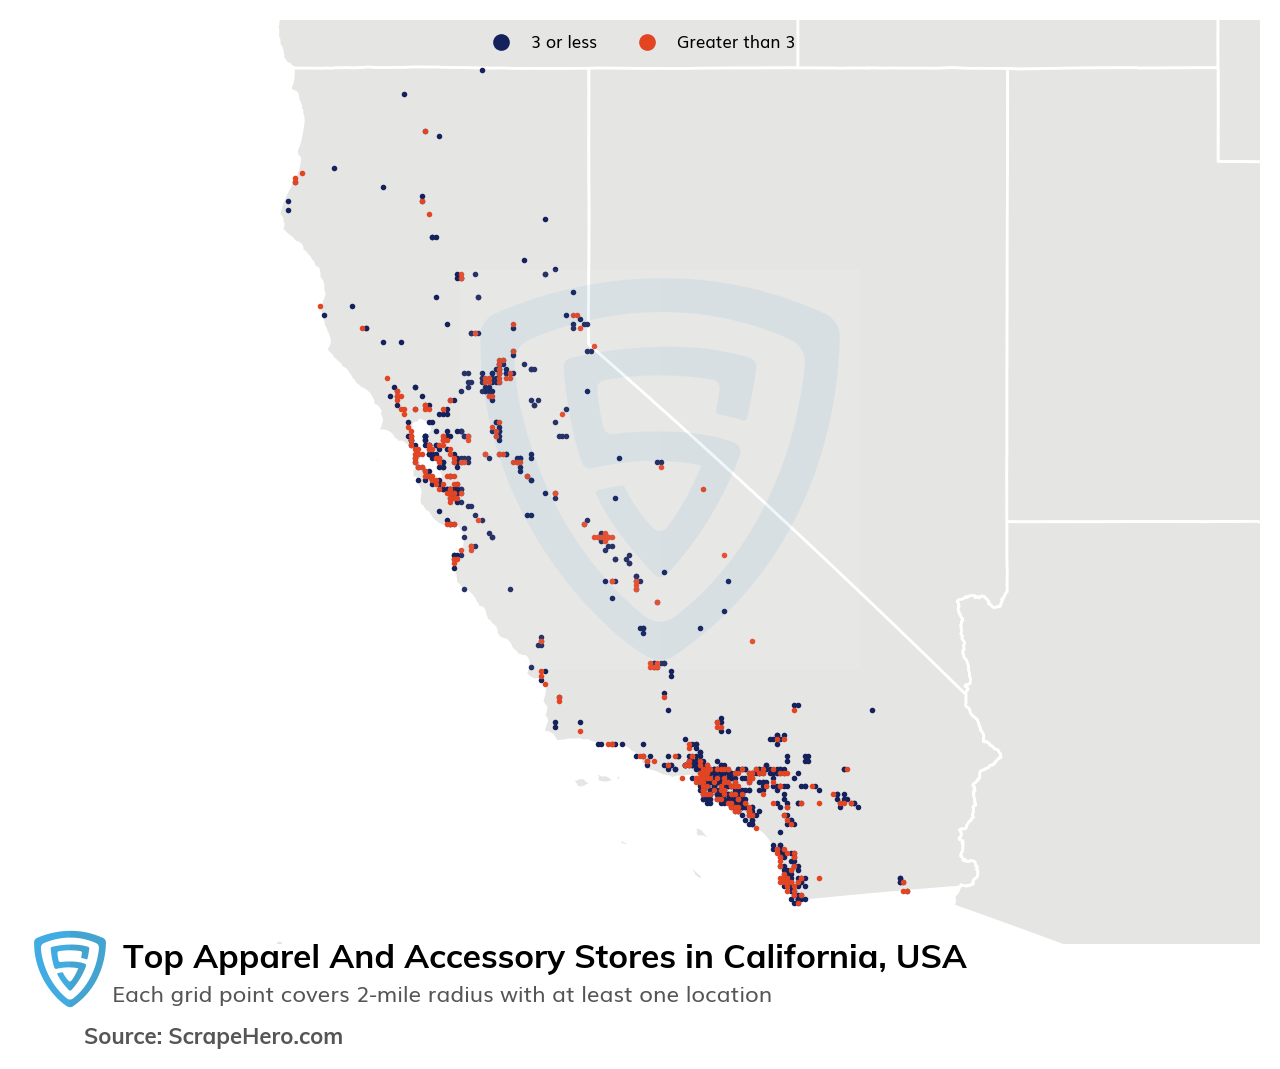 Map of 10 Largest Apparel & Accessory Stores in California in 2022 Based on Locations